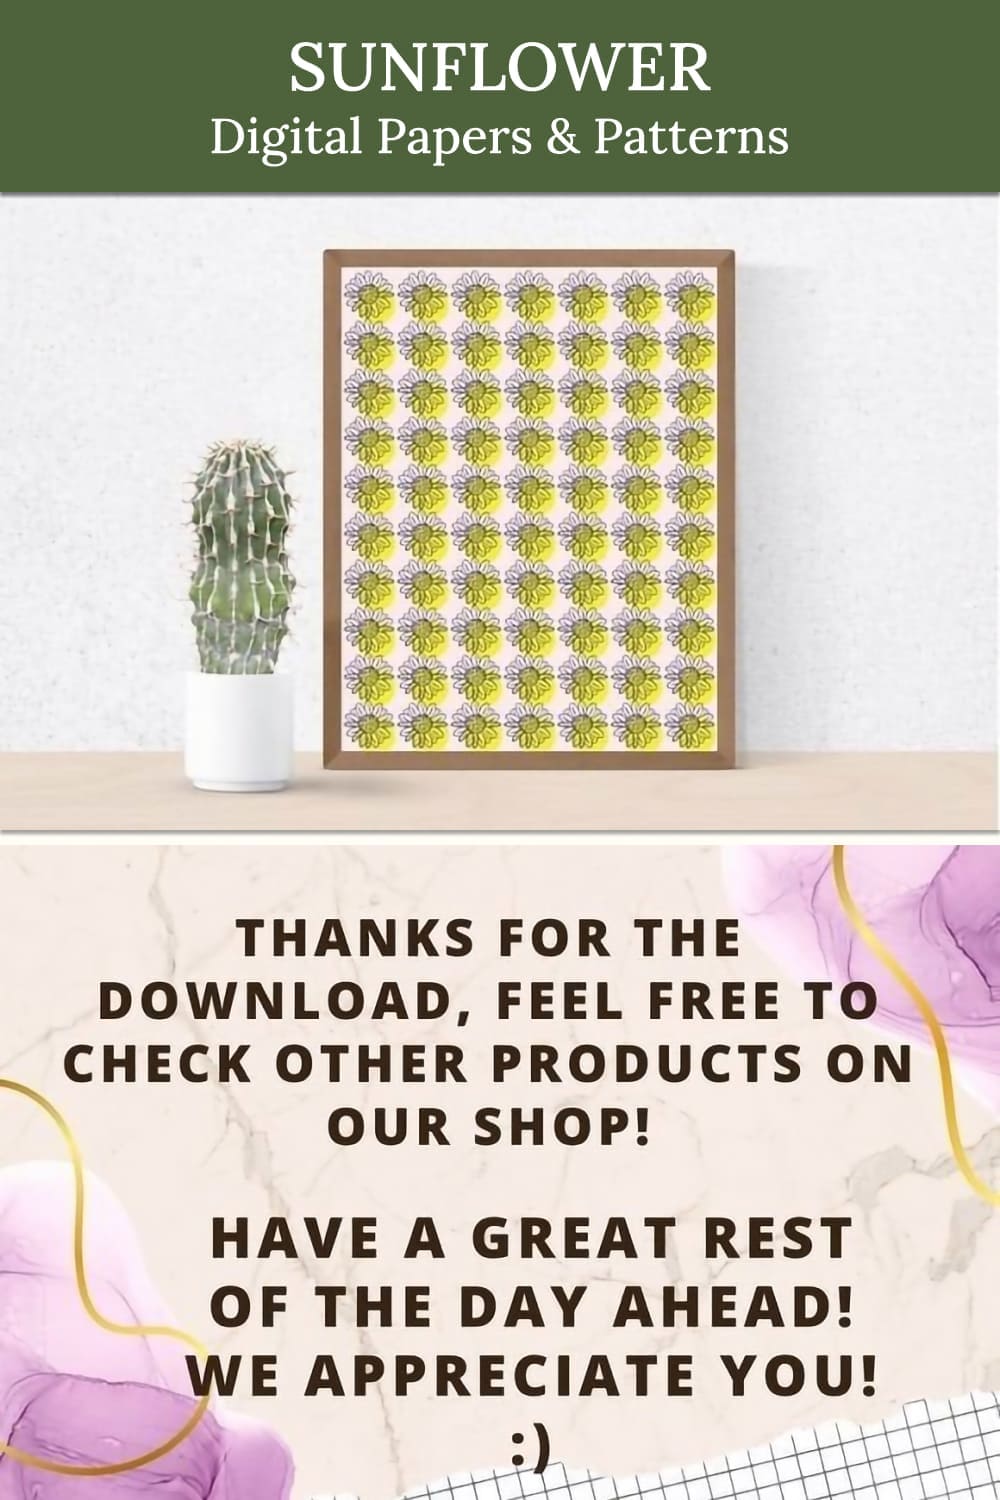 Sunflowers digital pattern with Inscription: Thanks for the download, Feel free to check other products on our shop!